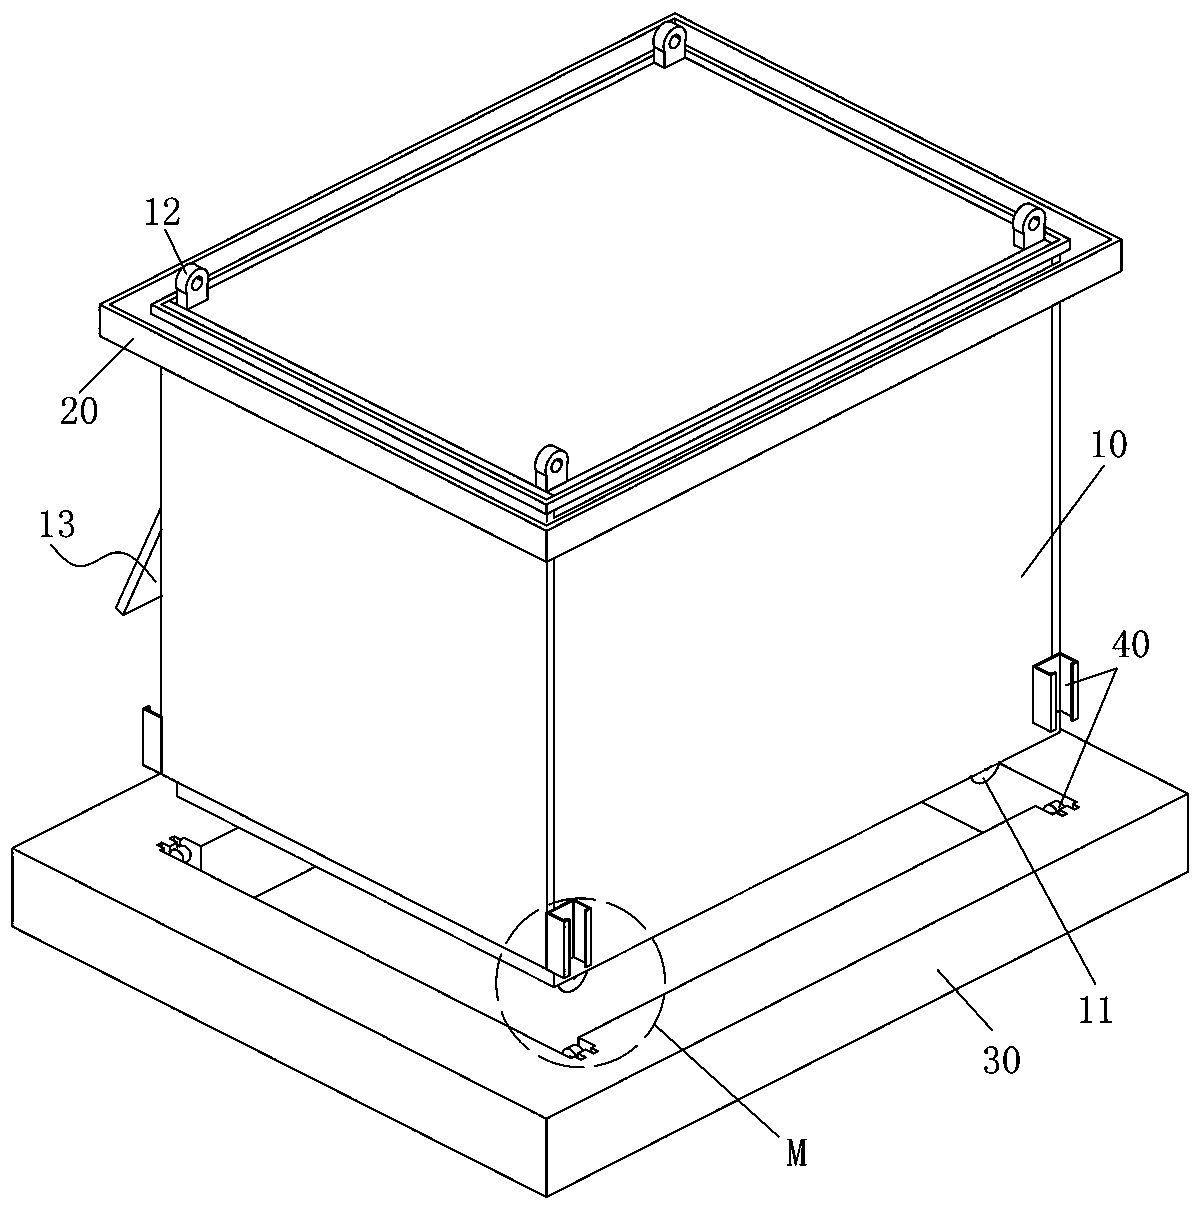 Fireproof isolation box for object